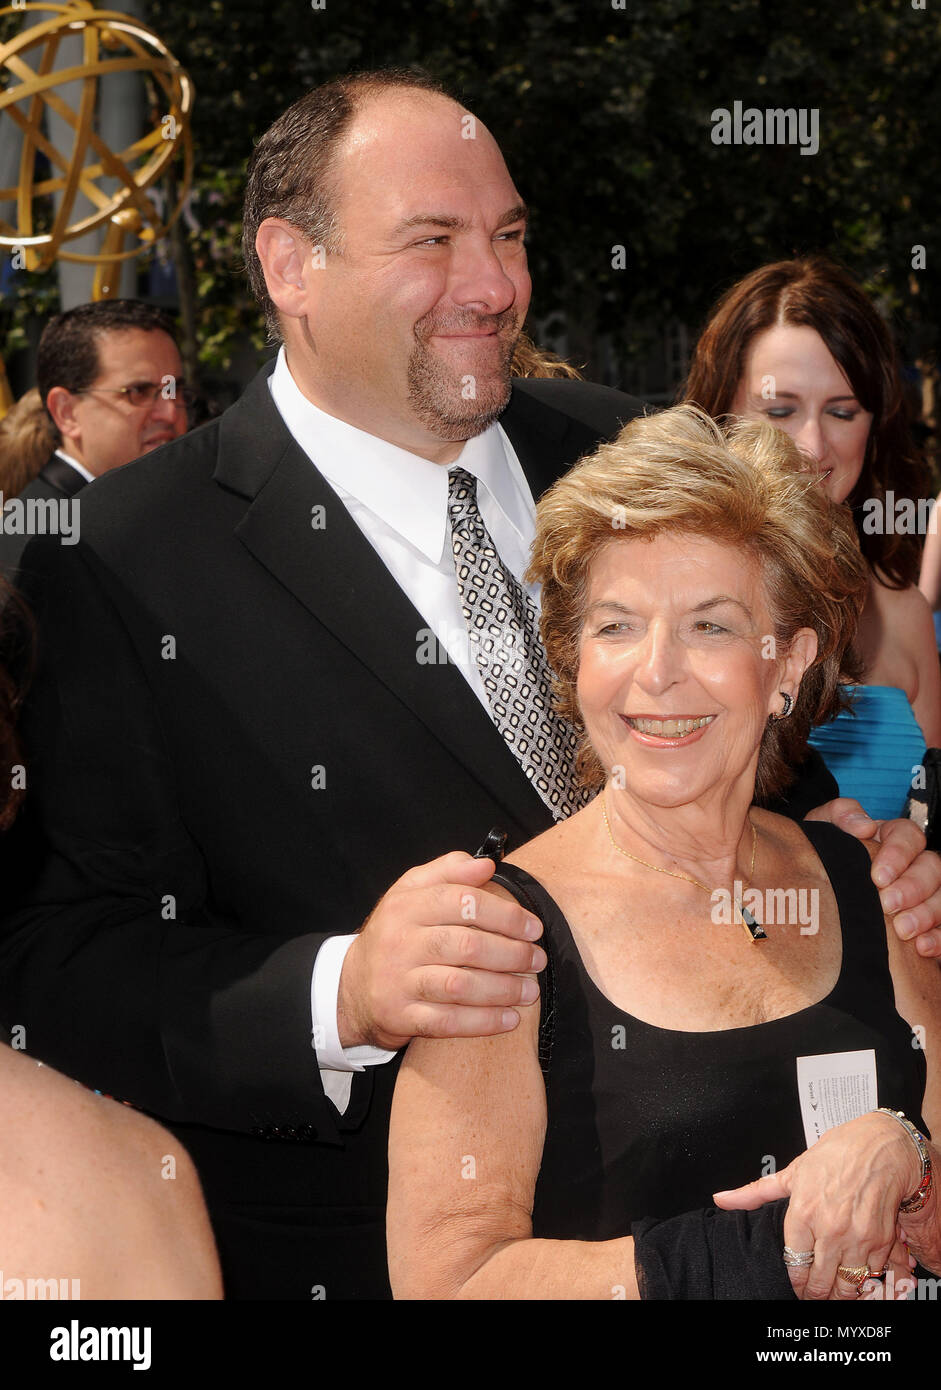 James Gandolfini and his mom  -  Creative Emmy Awards 2008 at the Nokia Theatre In Los Angeles.  three quarters smile GandolfiniJames mom 19  Event in Hollywood Life - California, Red Carpet Event, USA, Film Industry, Celebrities, Photography, Bestof, Arts Culture and Entertainment, Celebrities fashion, Best of, Hollywood Life, Event in Hollywood Life - California, Red Carpet and backstage, Music celebrities, Topix, Couple, family ( husband and wife ) and kids- Children, brothers and sisters inquiry tsuni@Gamma-USA.com, Credit Tsuni / USA, 2006 to 2009 Stock Photo